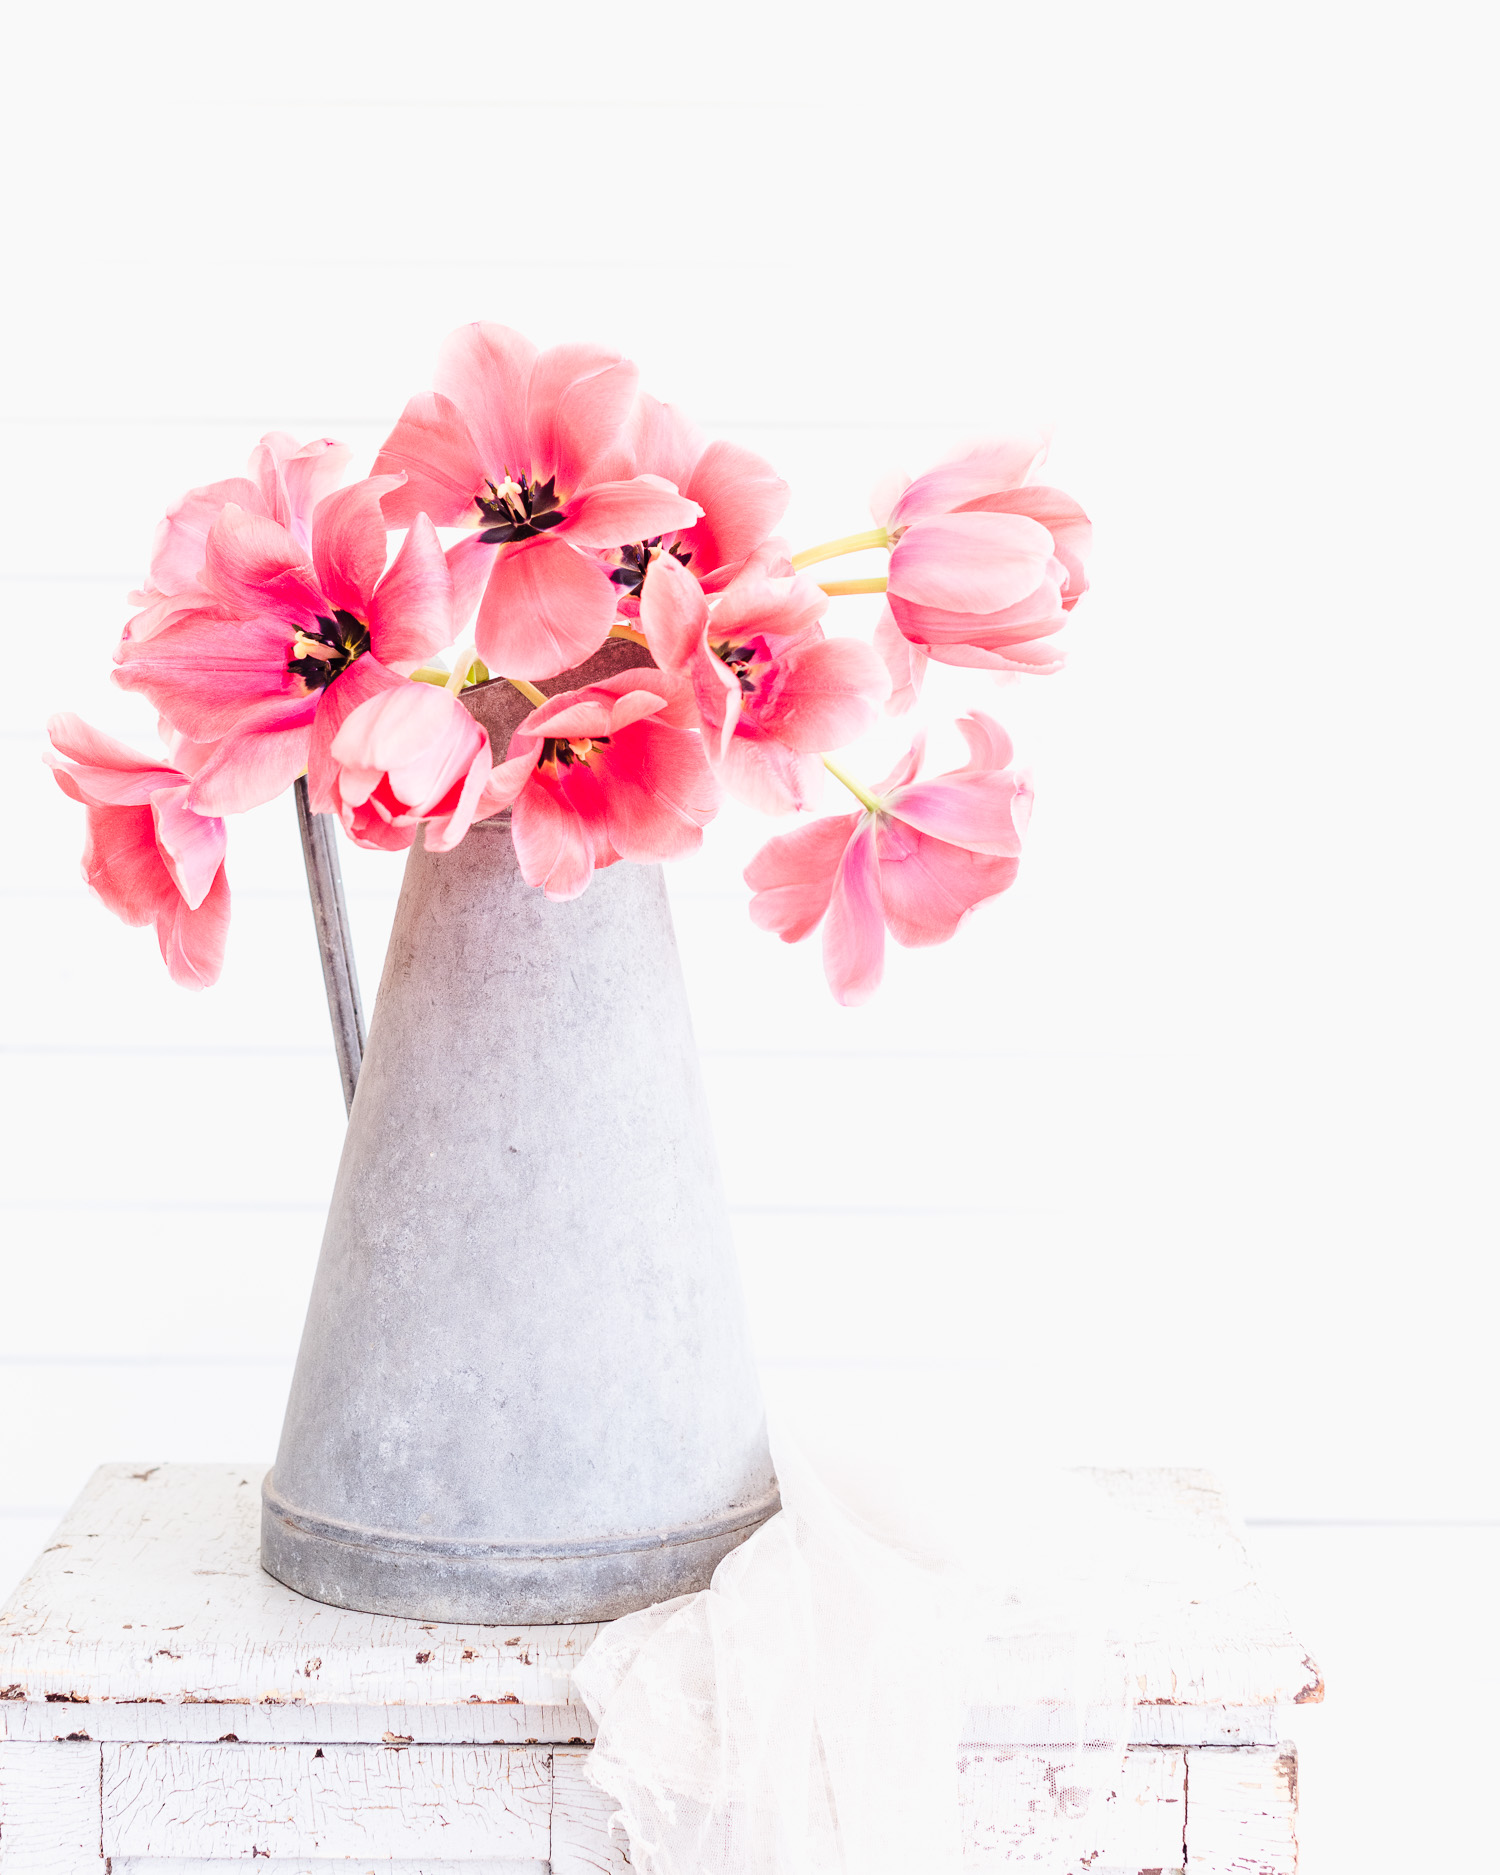 Reflexed Tulips | Pink Tulips in an Antique French Pitcher